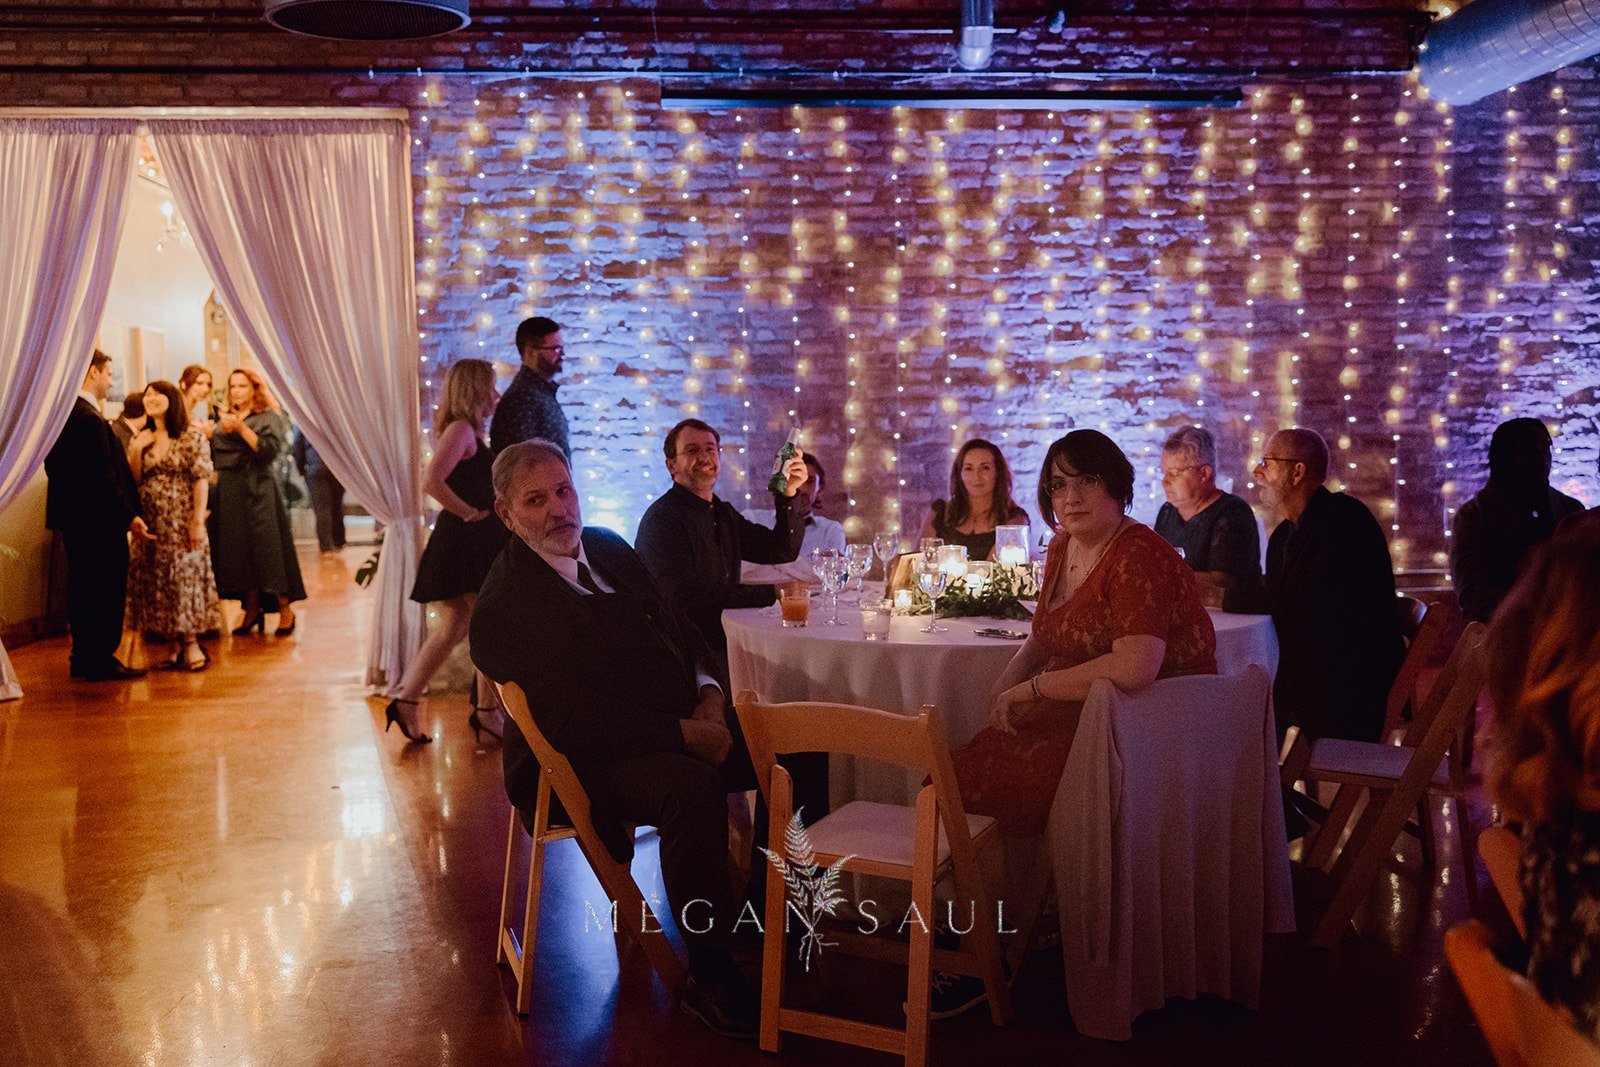 CHICAGO-WEDDING-PHOTOGRAPHY-BY-ARTISTS-AND-STORIES-BY-MEGAN-SAUL-RECEPTION (199 of 211)_websize.jpg